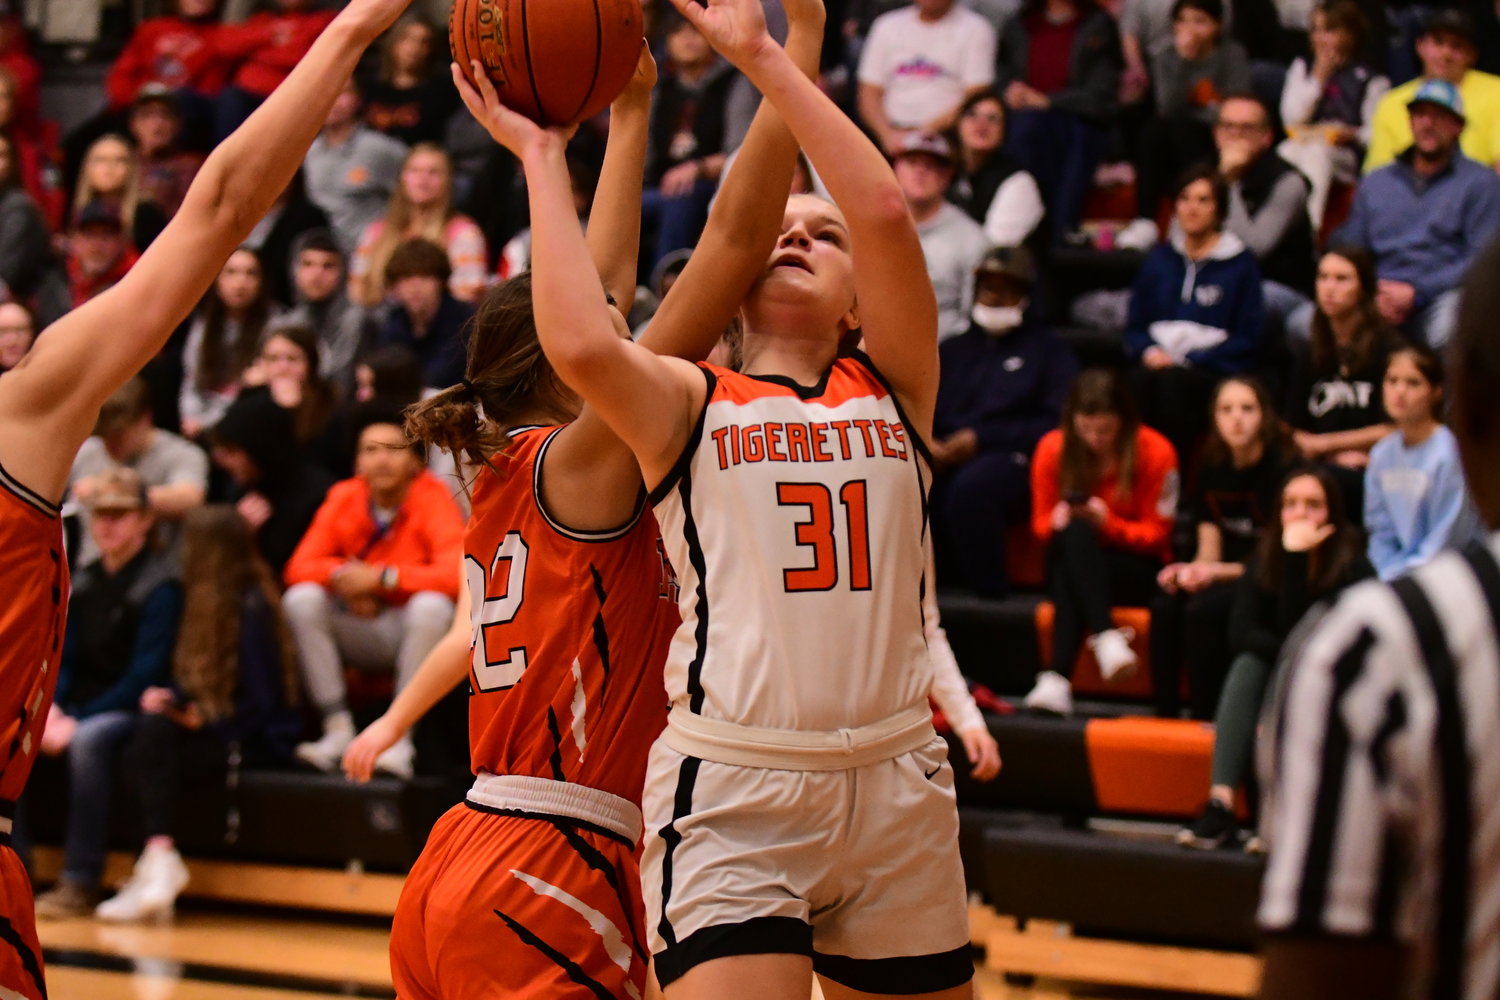 Action from the girls title game at the Macon Tournament, contested between Kirksville and Macon on Jan. 22.